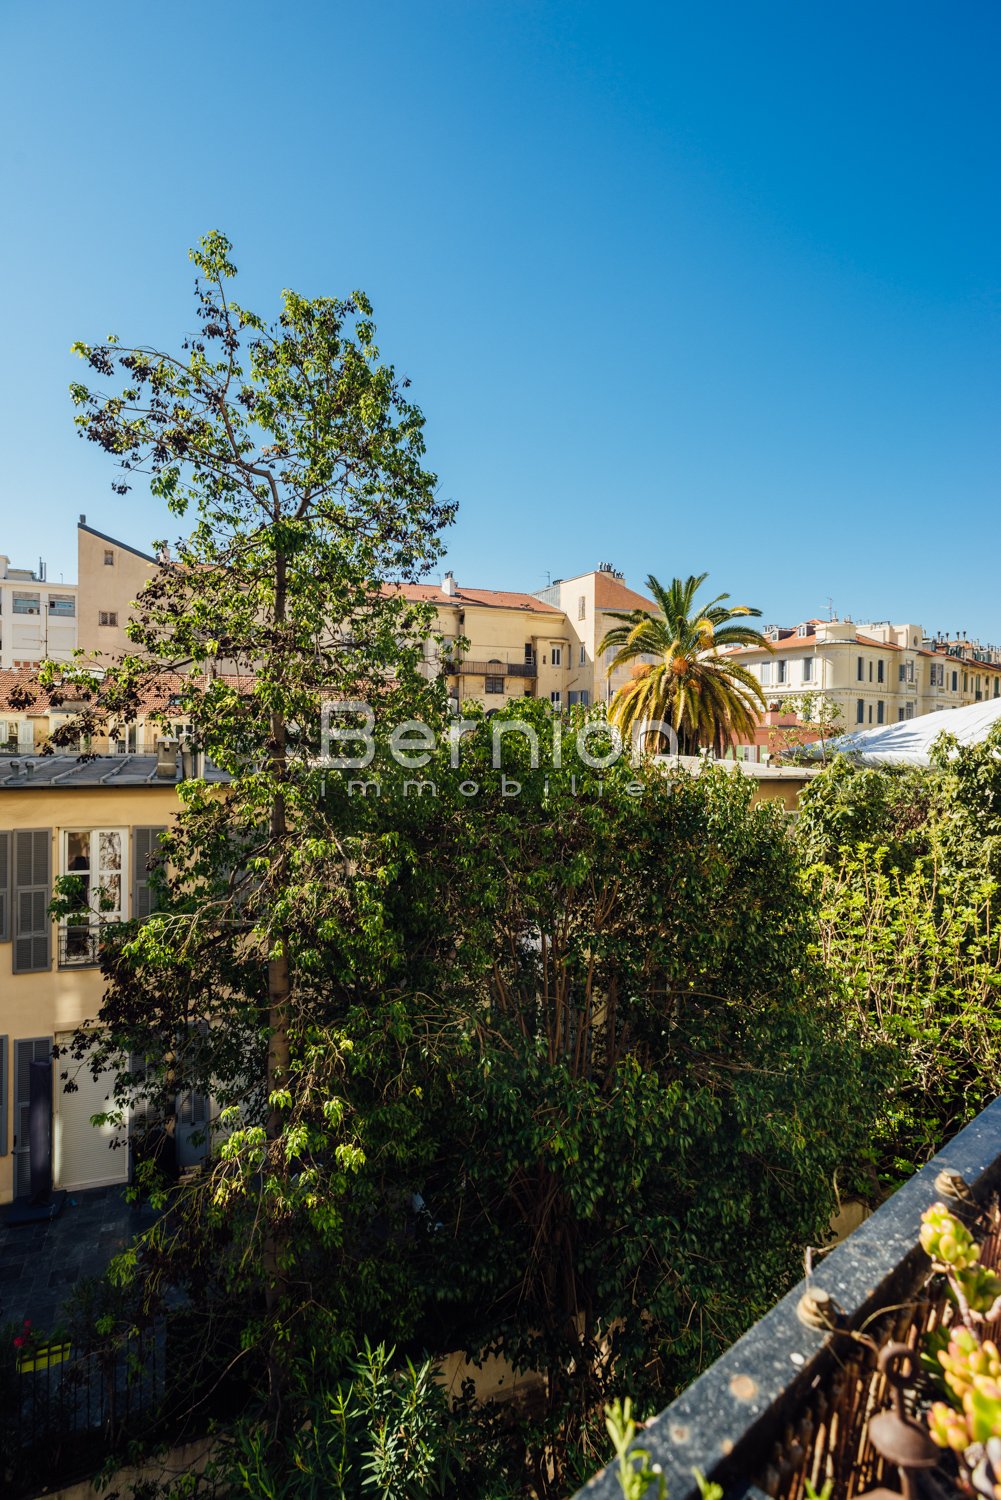 For Sale, Nice City Center Beautiful 72 sqm Apartment with terrace in Art Deco Building / photo 5